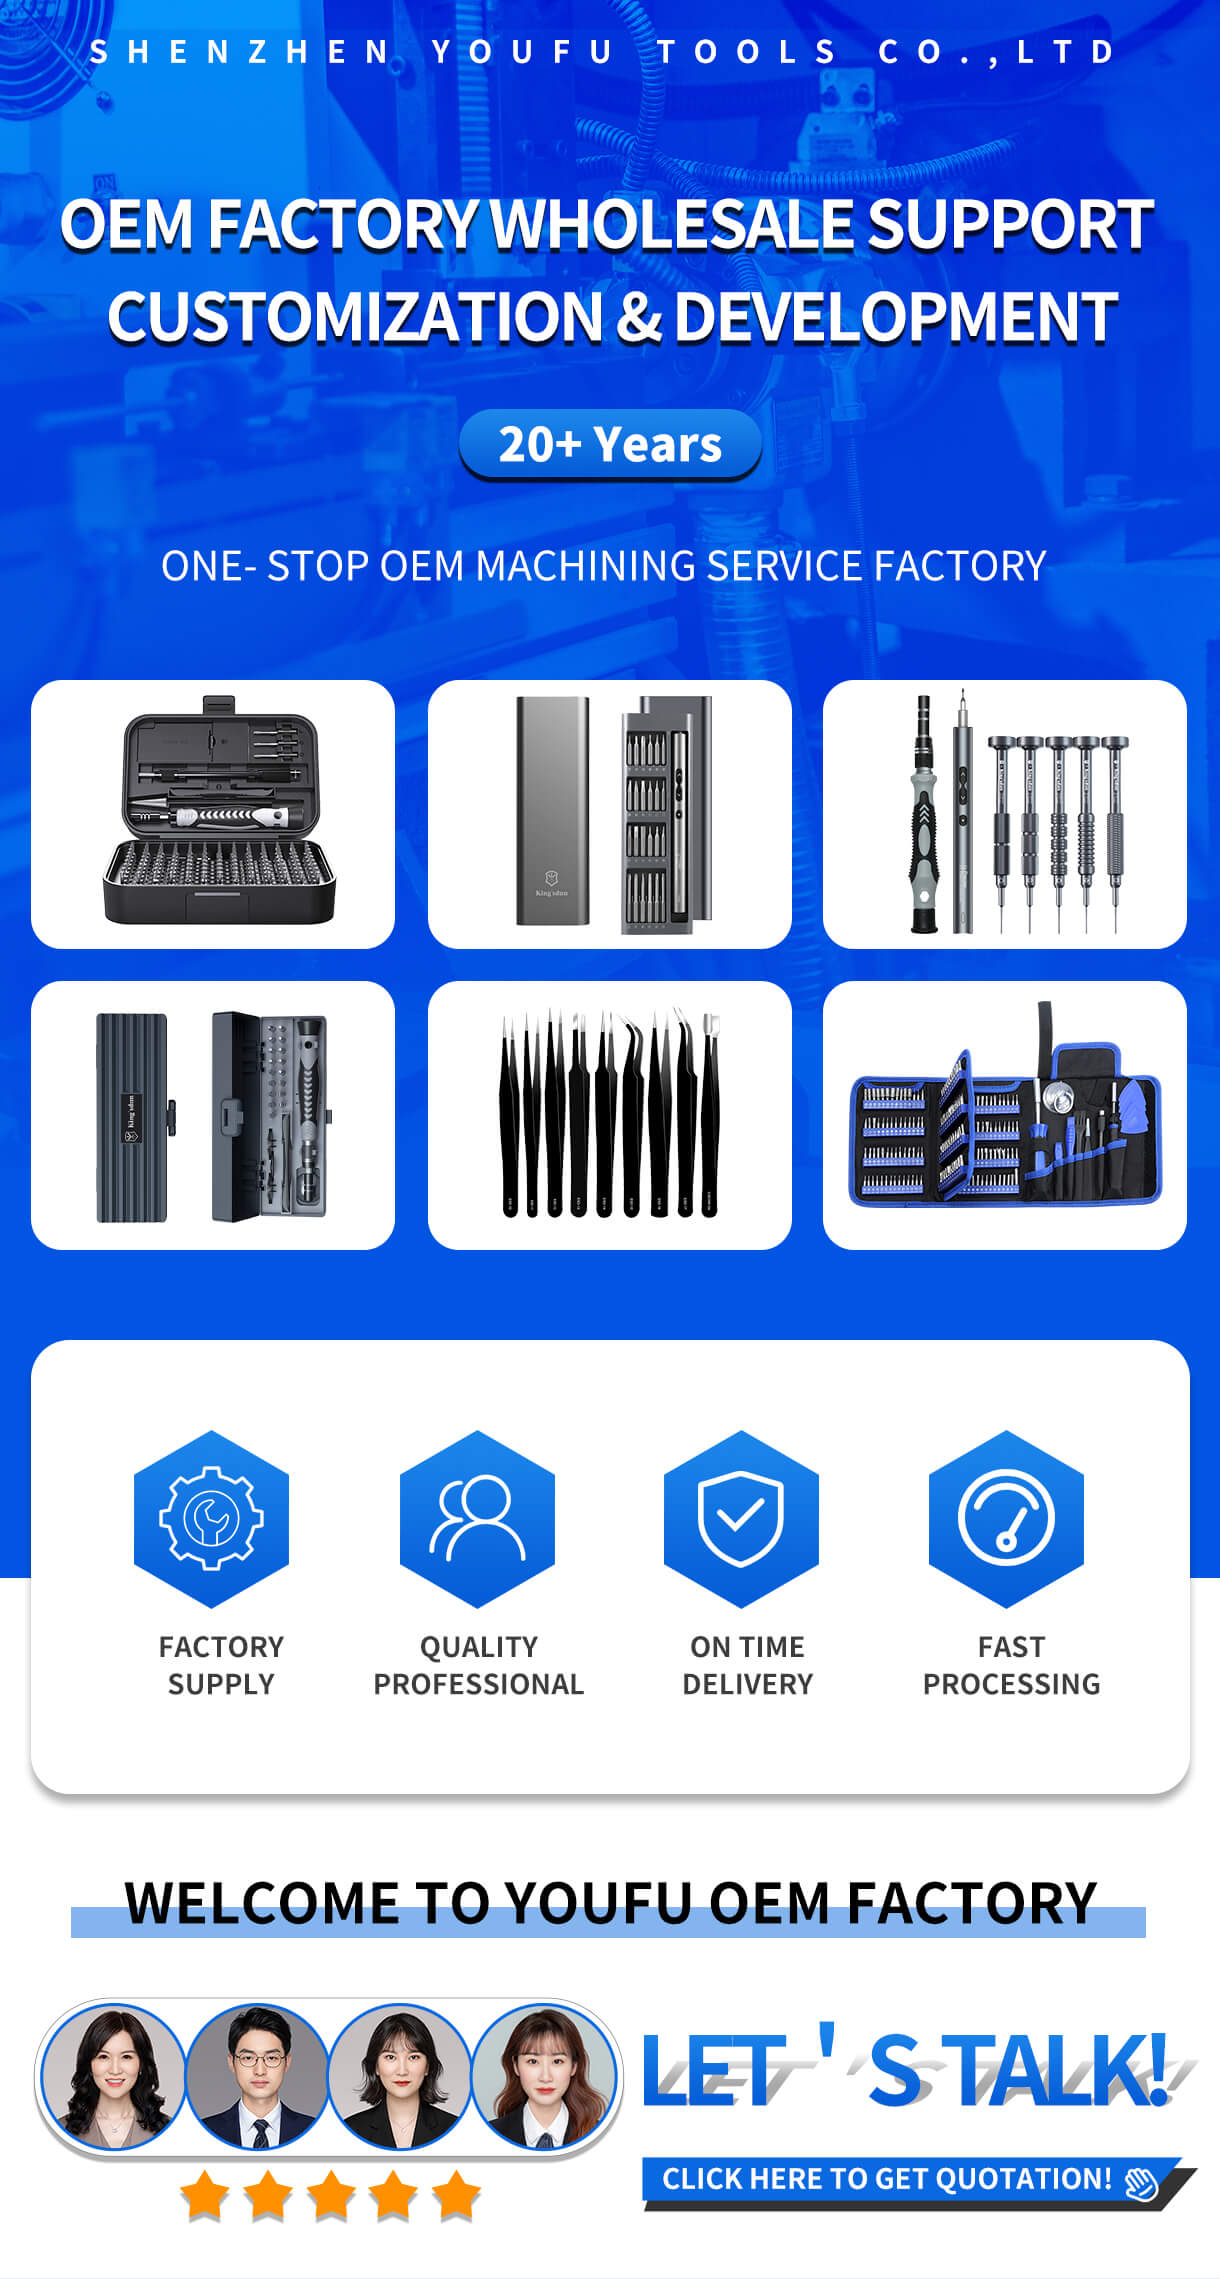 Professional tools make it easier to disassemble, Lightweight, compact design.High hardness and good toughness, non-slip handle.Complete specifications of the high-quality precision batch head can adapt to different areas of operation.Designed for Smartphone computers, electronic cigarettes, Xbox, t